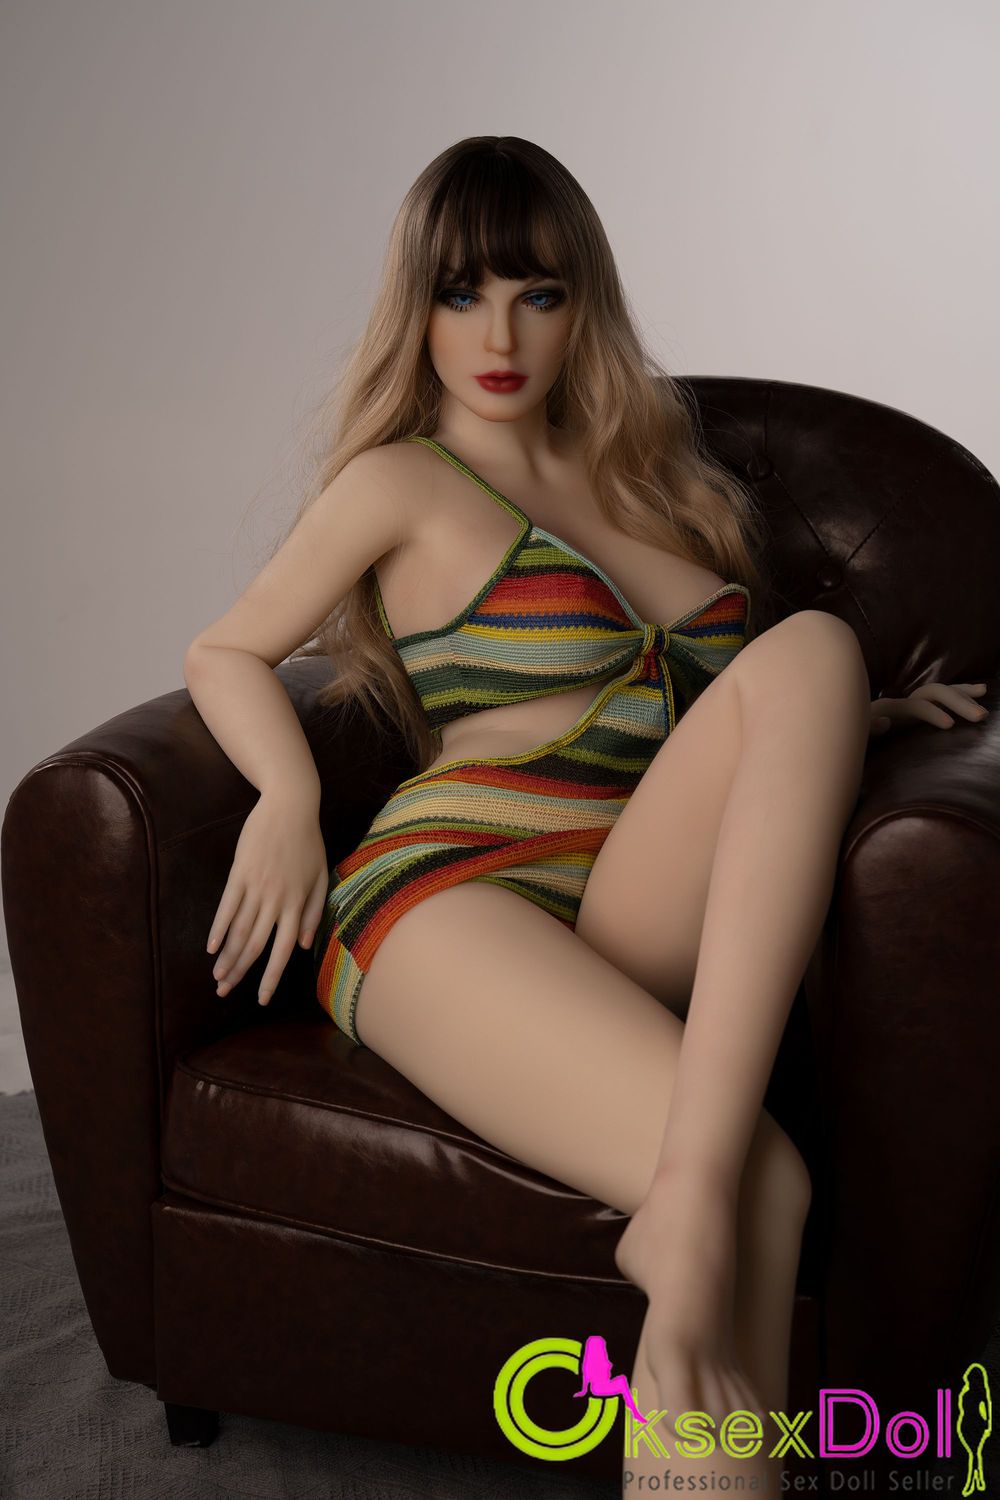 D Cup real sex doll images